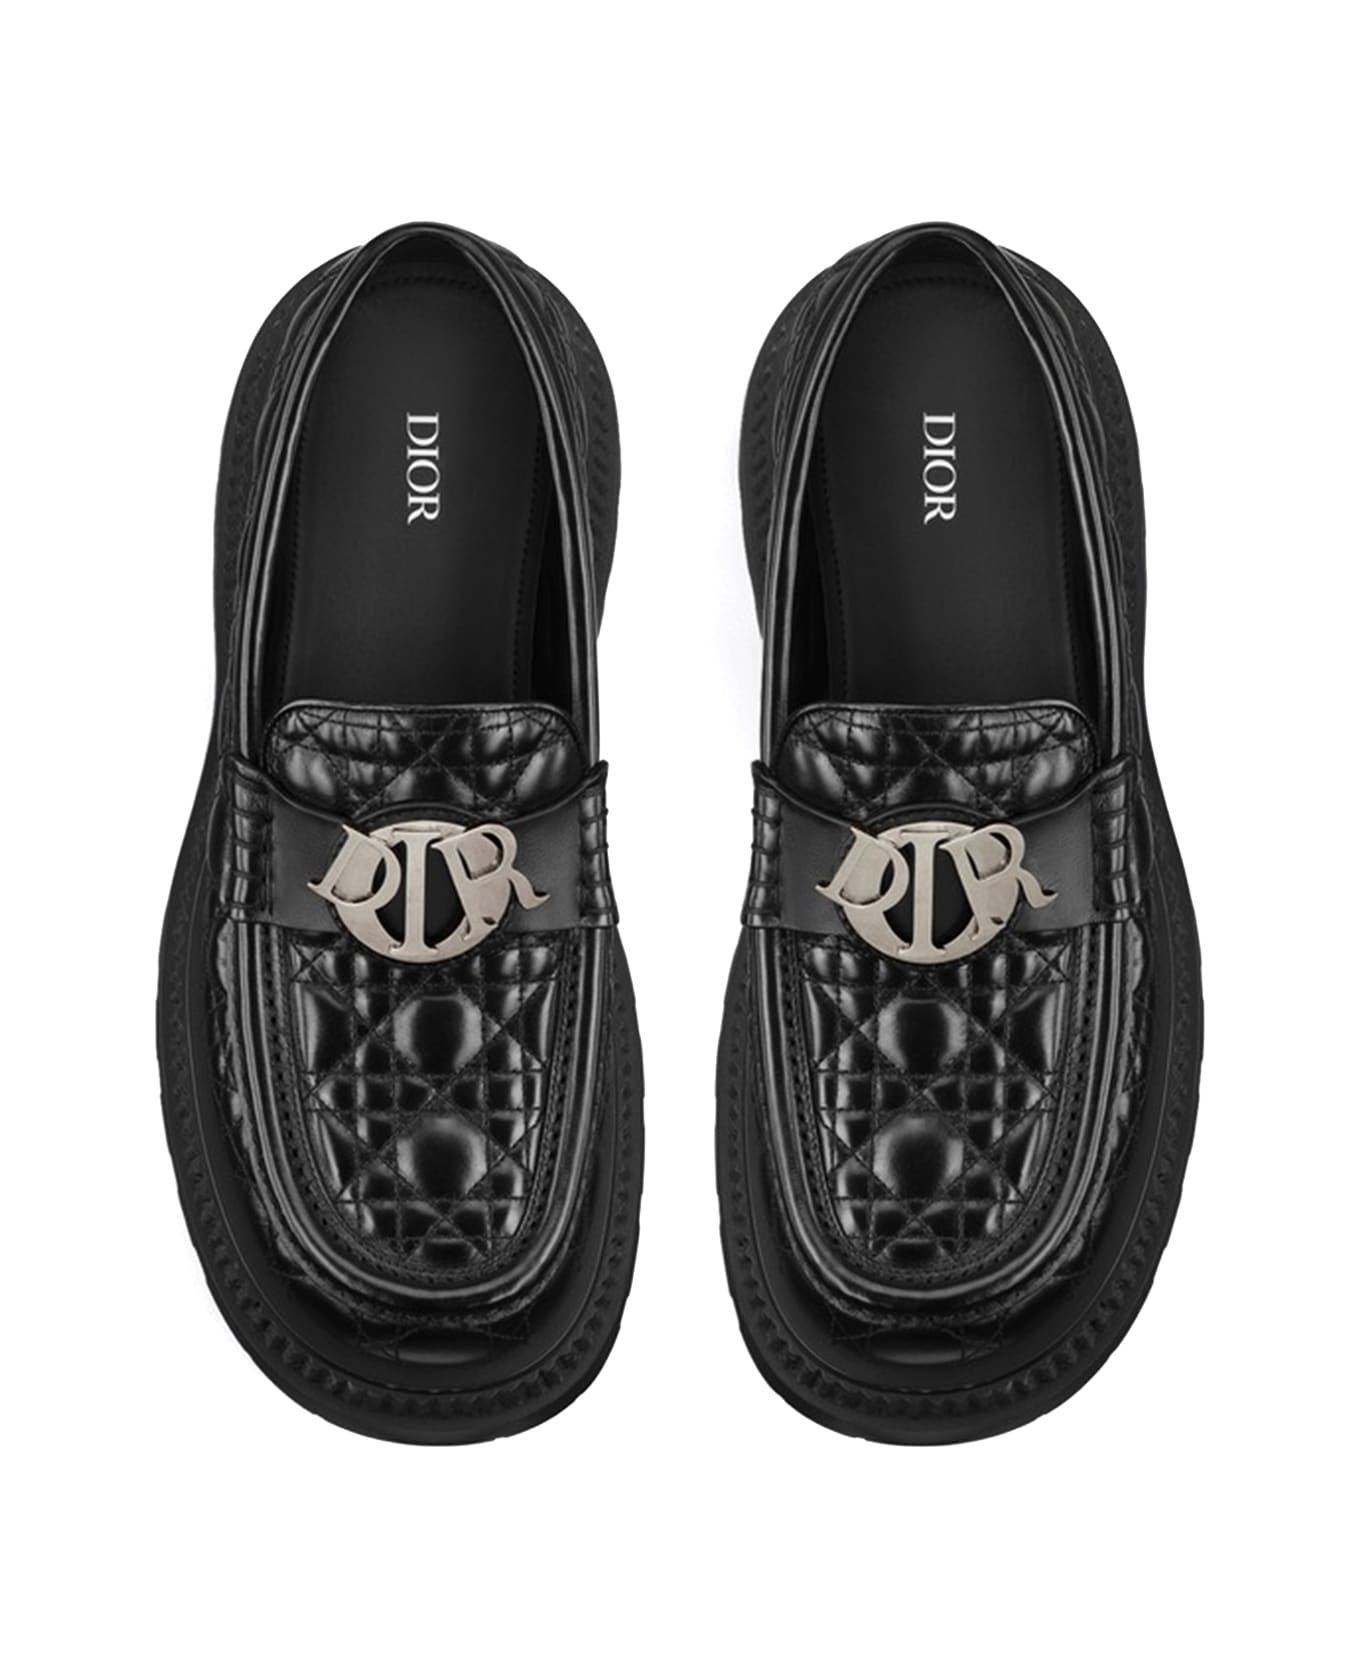 Dior Homme Loafers - BLACK ローファー＆デッキシューズ